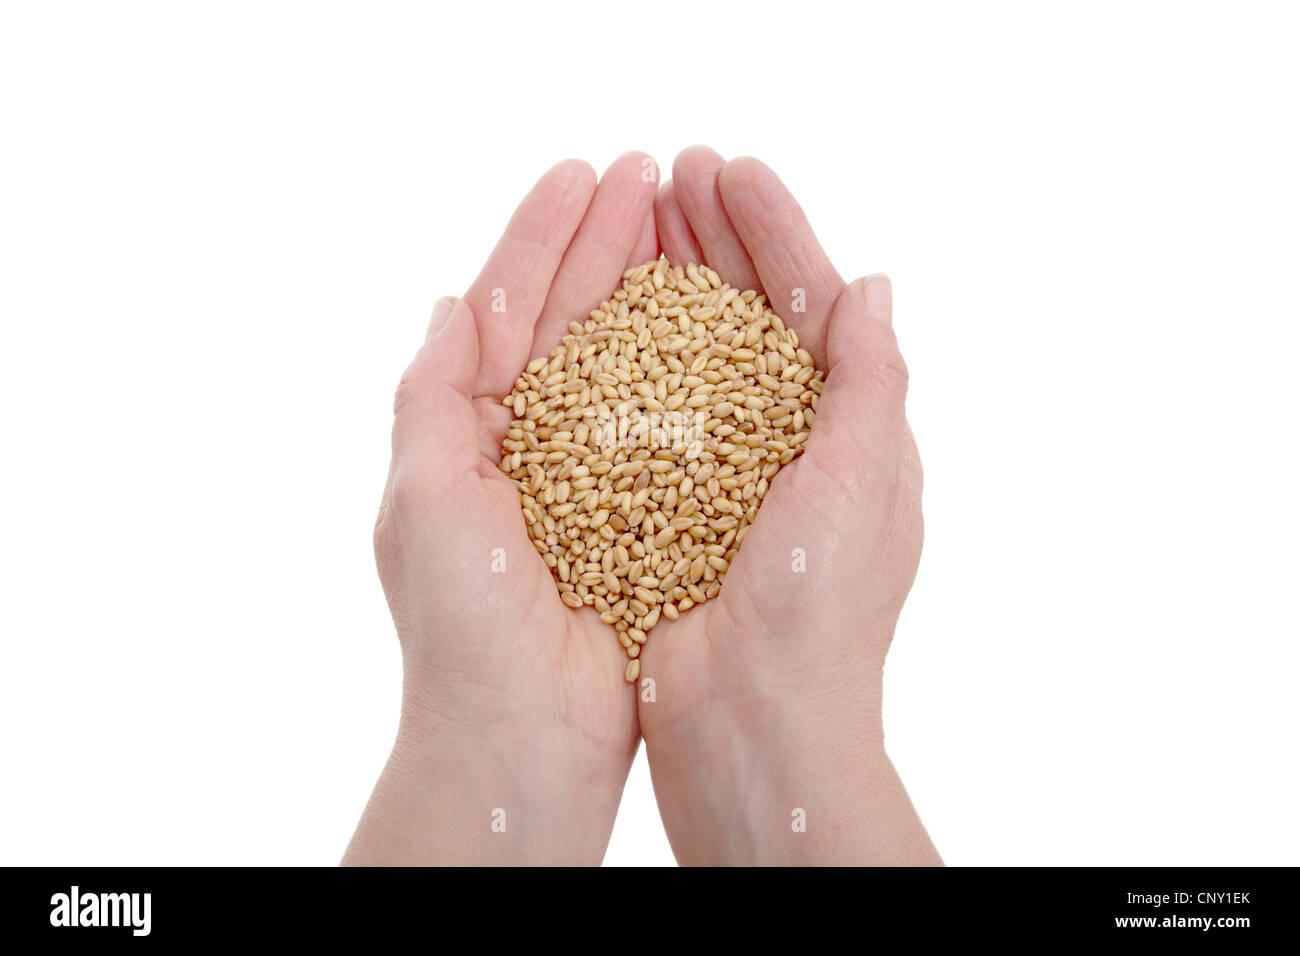 Human hand holding heap of wheat seed, isolated on white Stock Photo